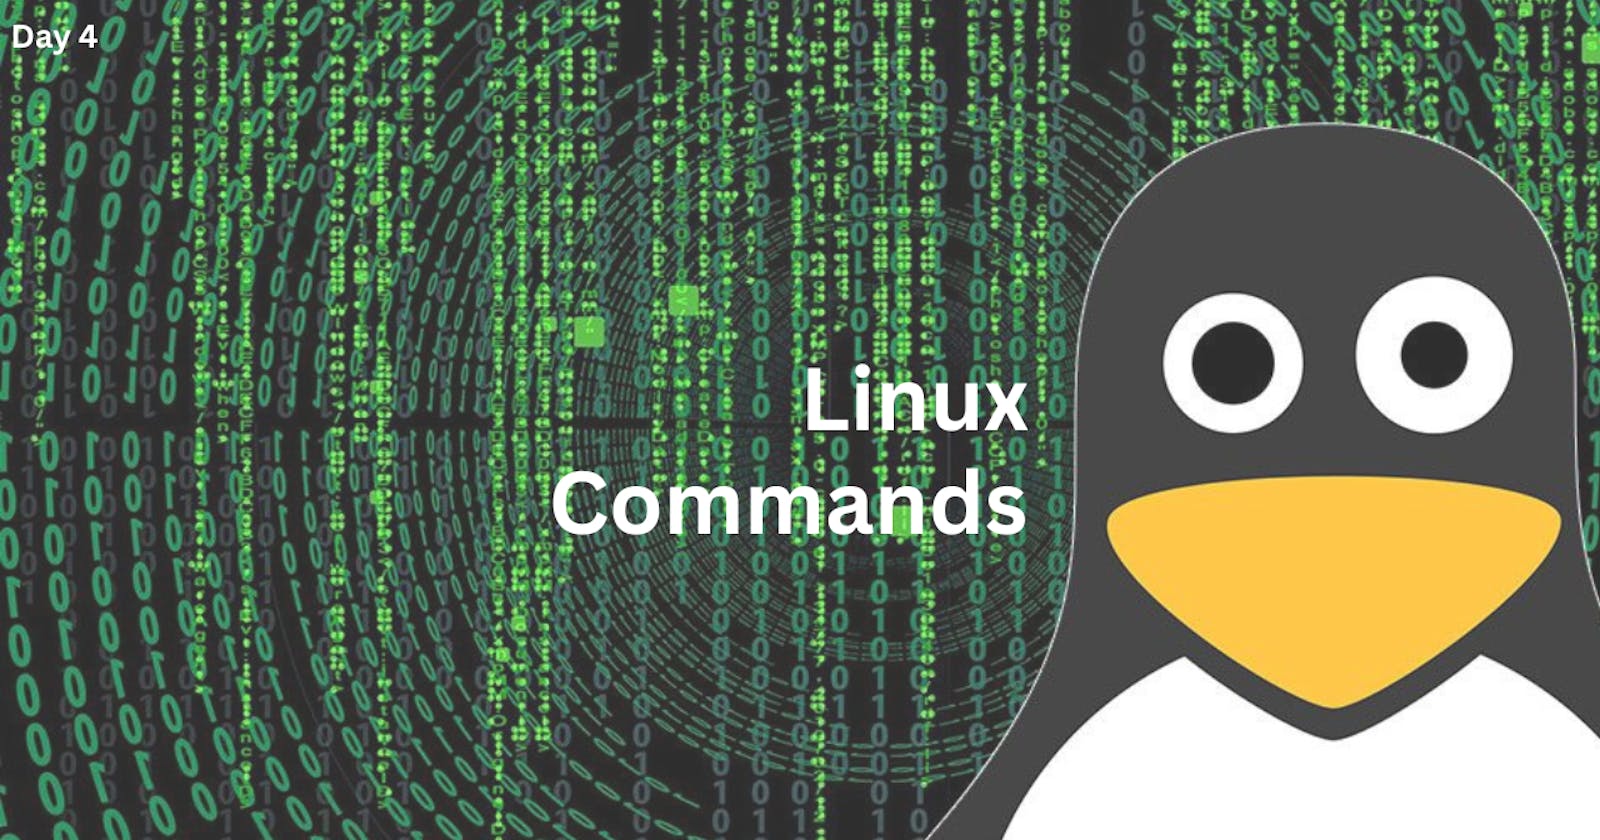 Day 4: Some more Linux Commands